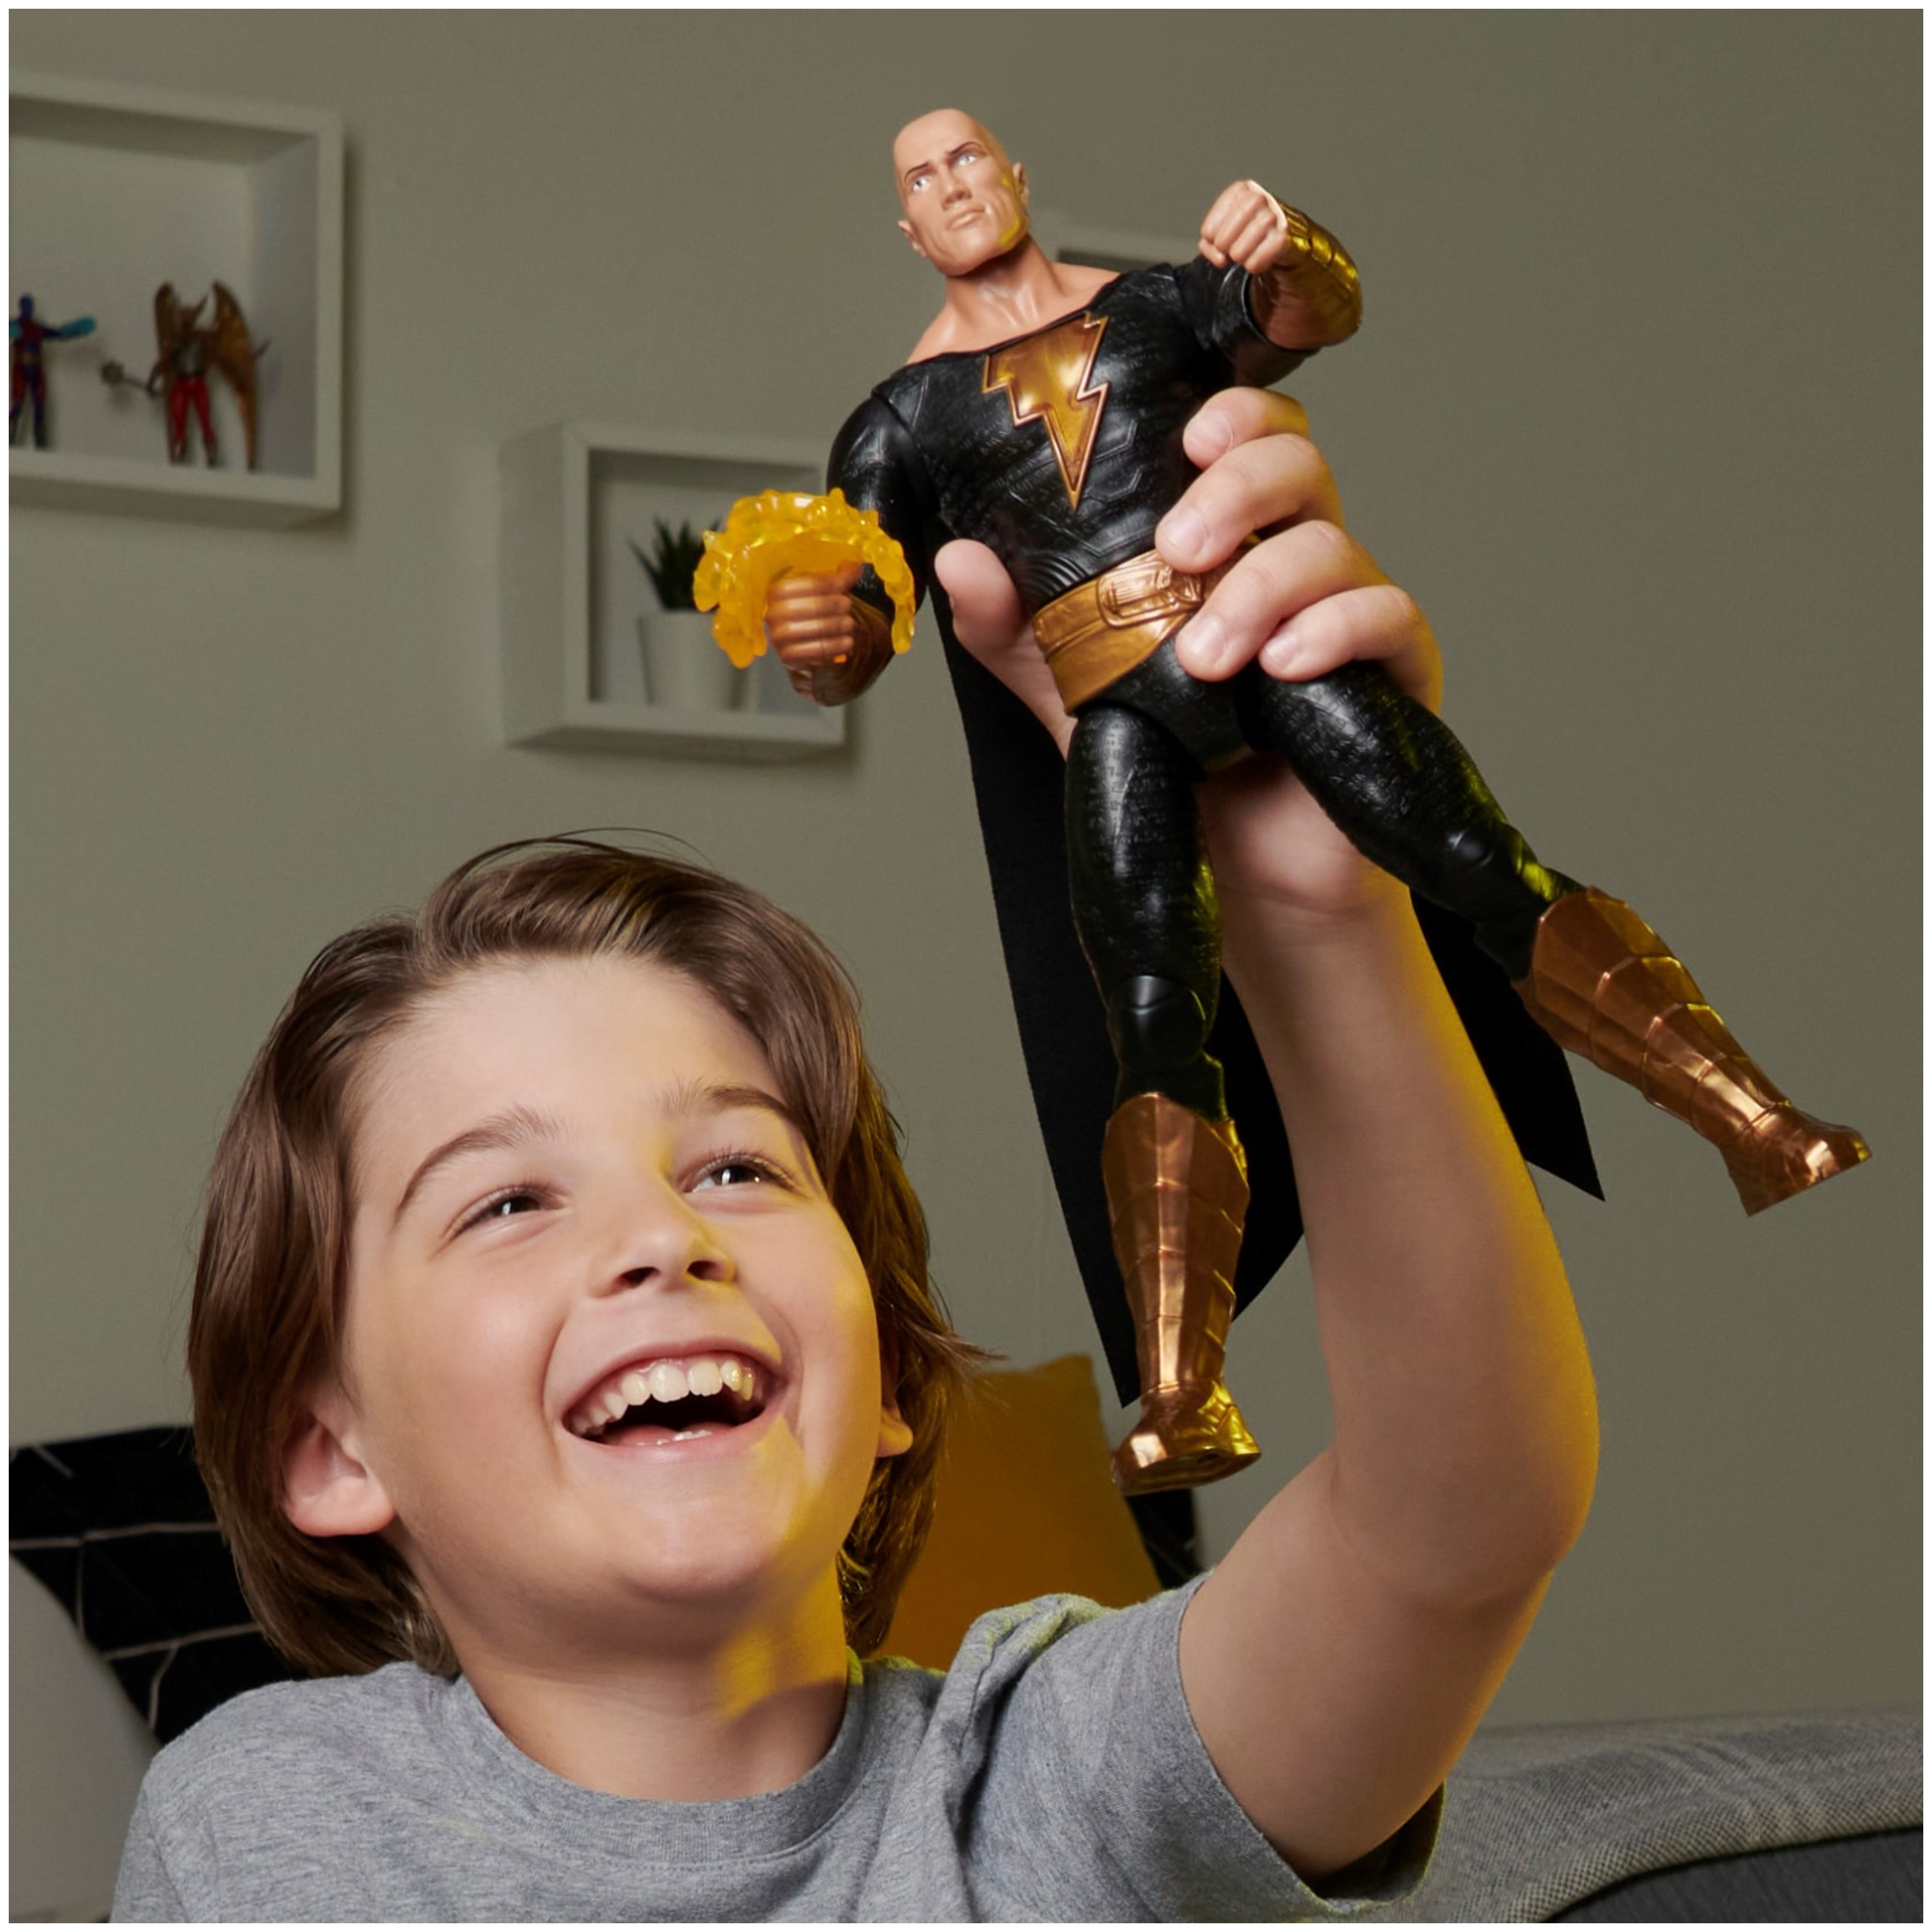 DC Comics, Power Punch Black Adam 12-inch Action Figure, 20+ Phrases and  Sounds, Lights Up with 2 Accessories, Black Adam Movie Collectible Kids  Toys